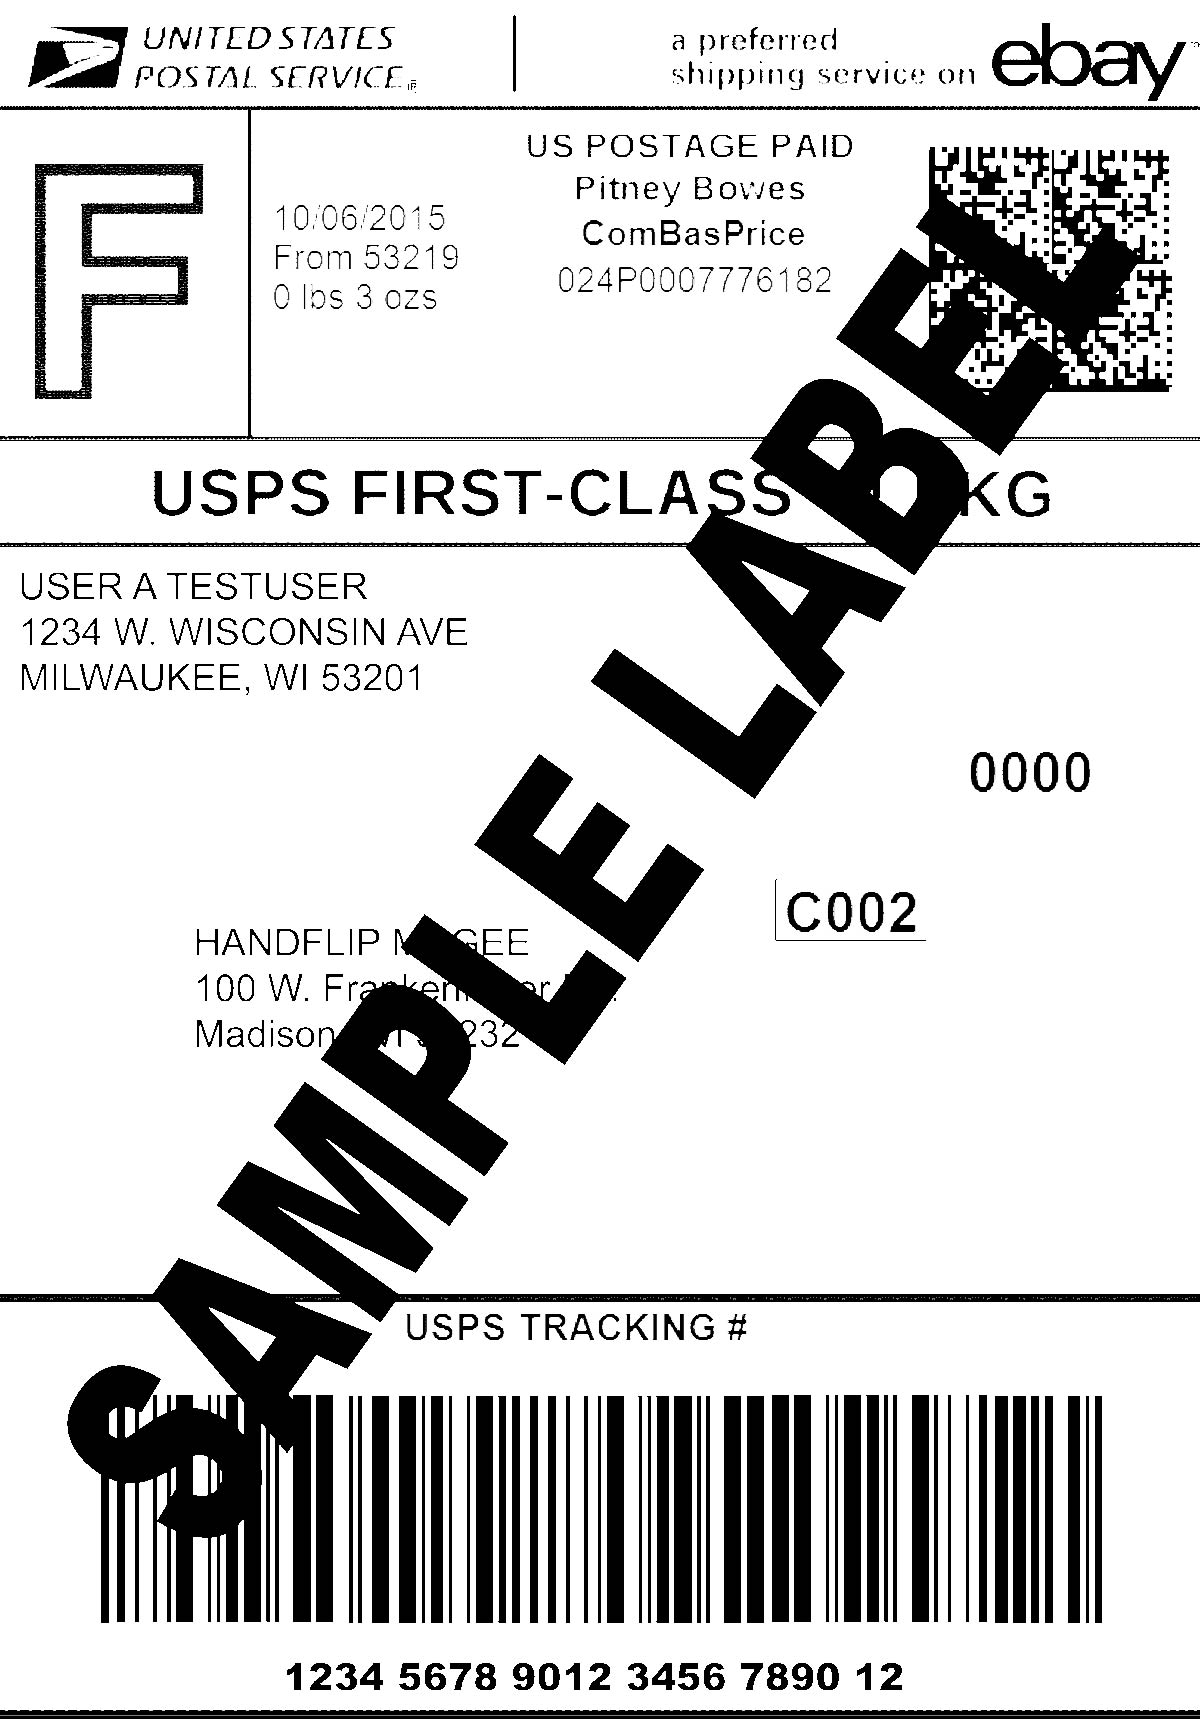 Thermal Printer test - Shipping Label - Too Light.